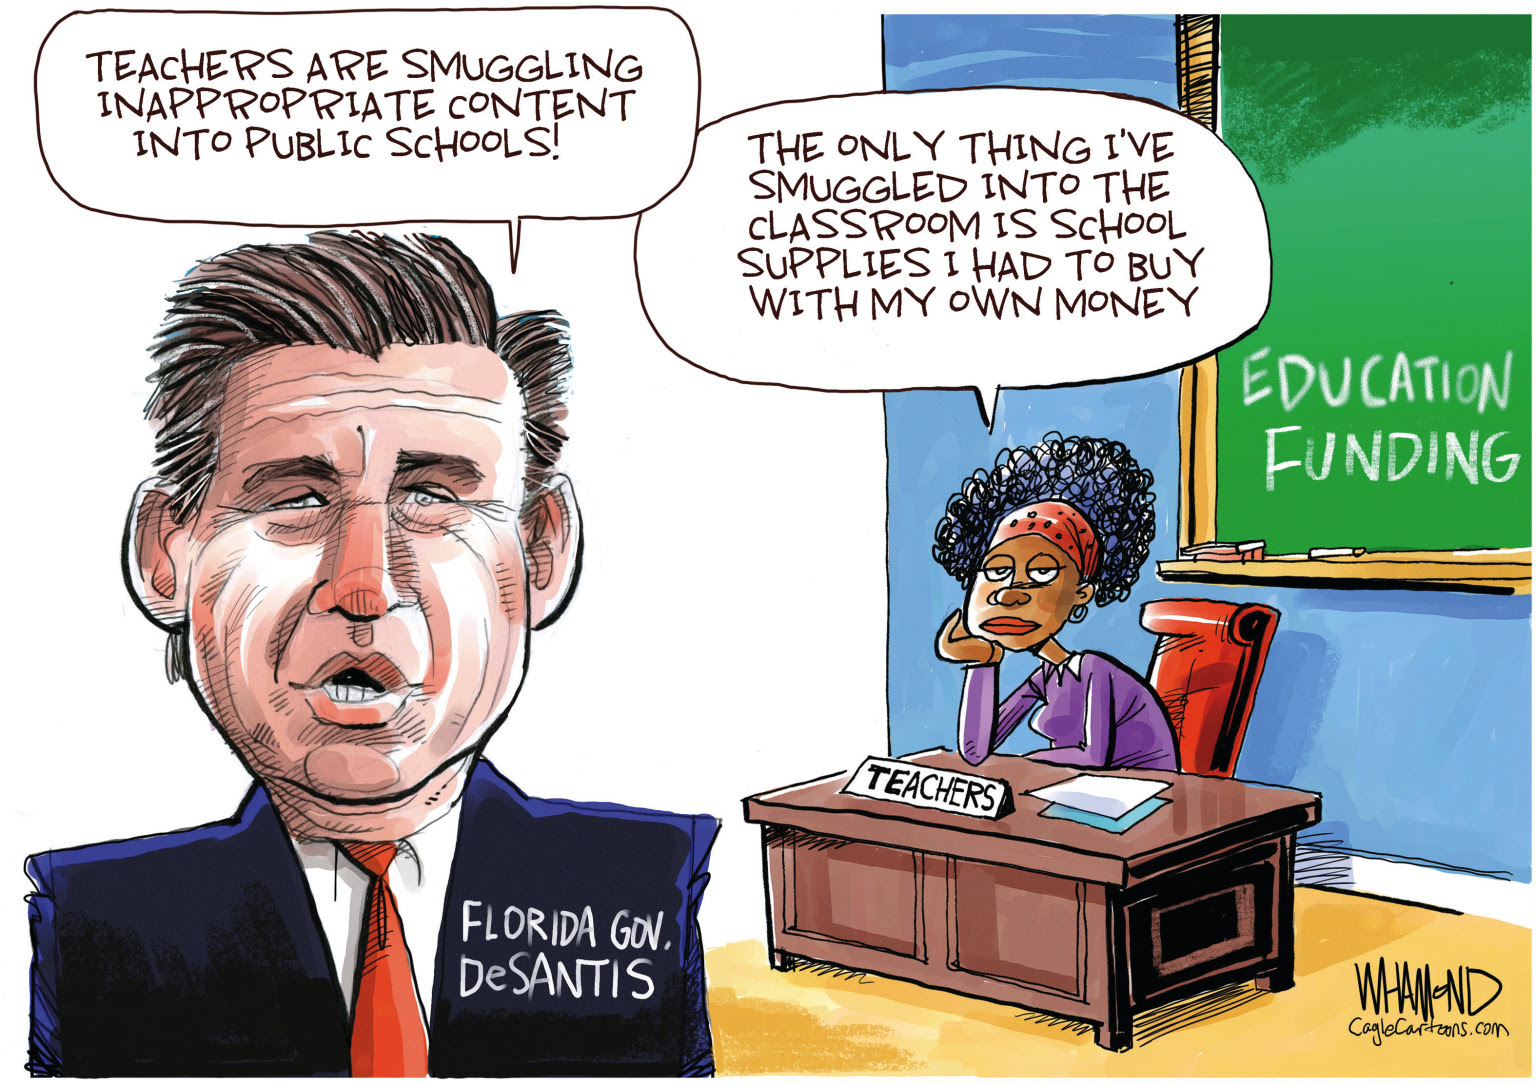 DeSantis cuts public school funding and censors education denying students an honest education